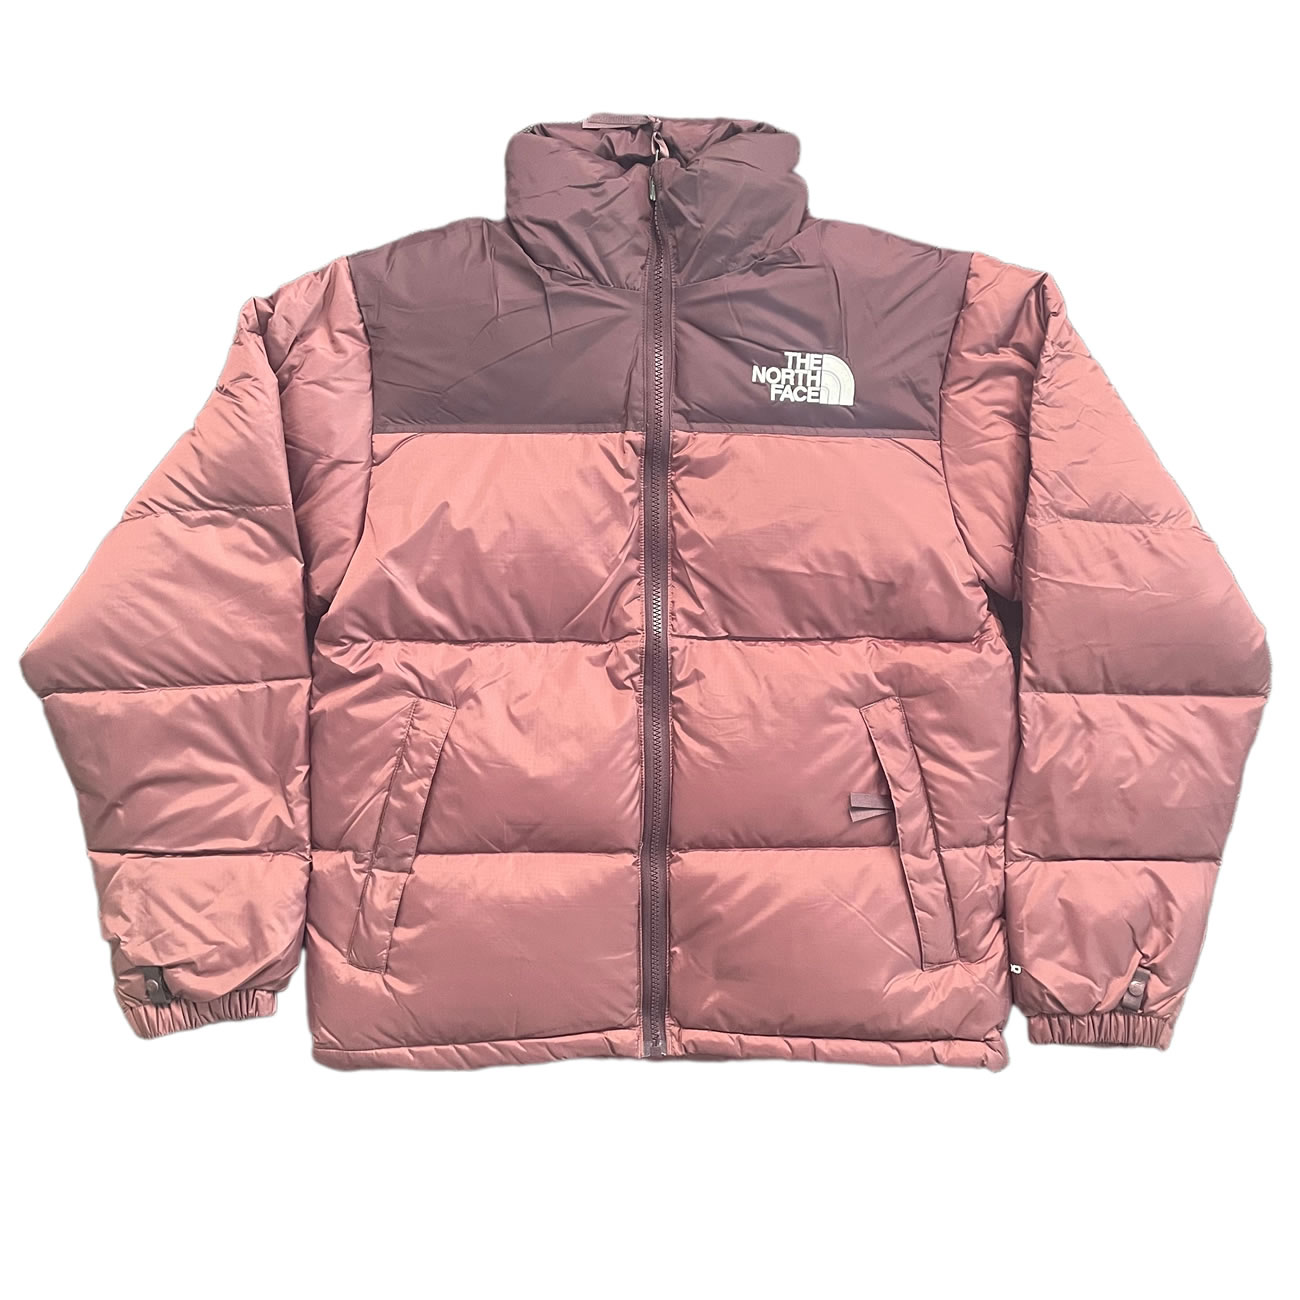 The North Face 1996 Retro Nuptse Packable Jacket Fw21 (15) - newkick.org